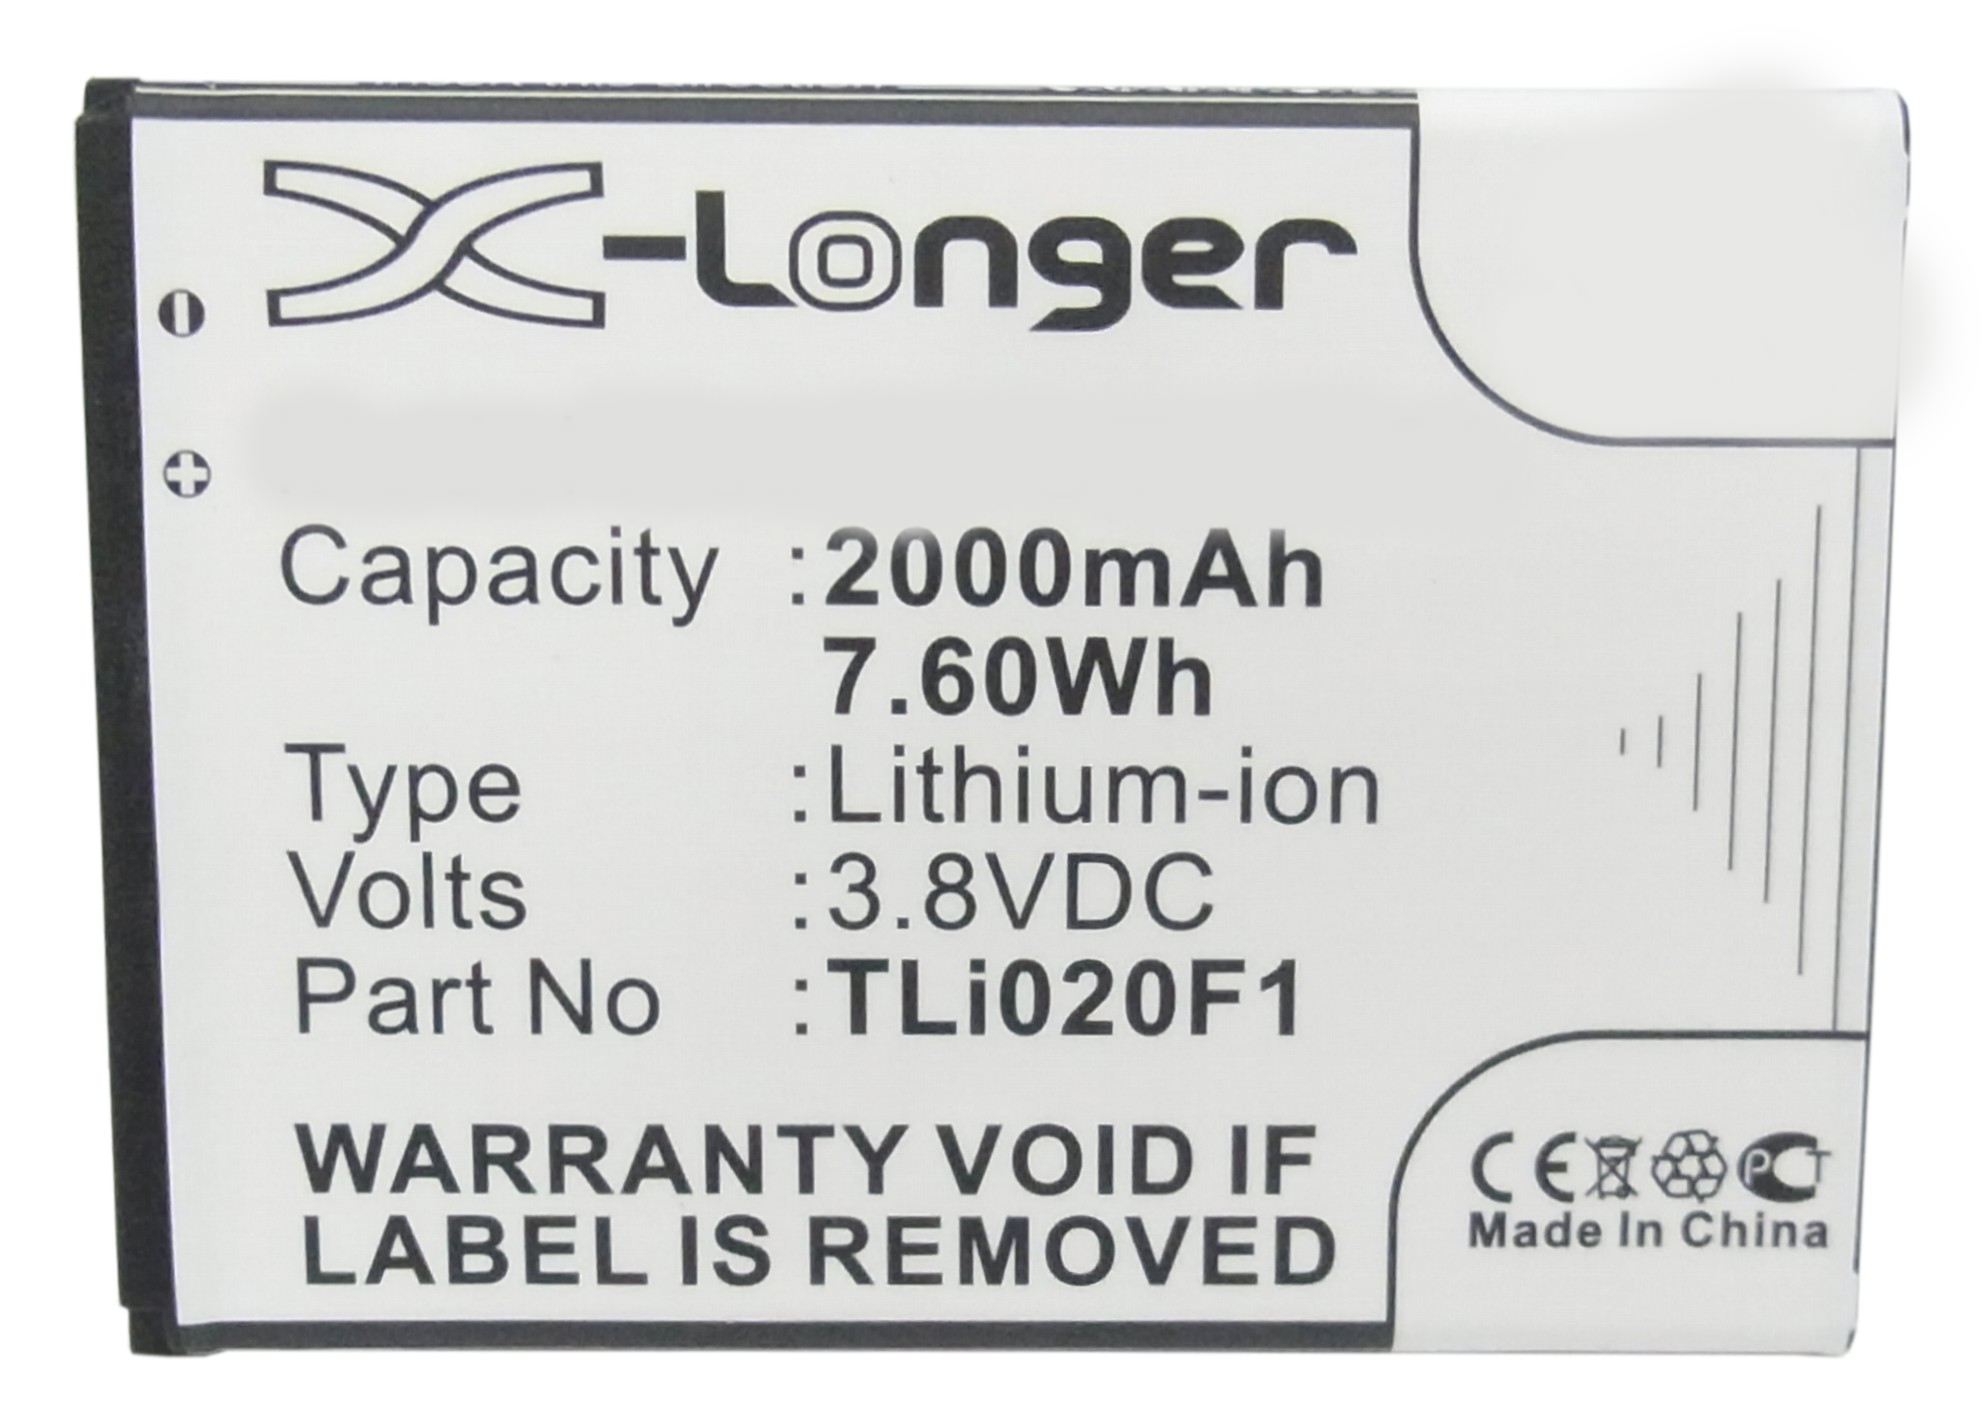 Synergy Digital Battery Compatible With Alcatel TLi018B2 Cellphone Battery - (Li-Ion, 3.8V, 2000 mAh / 7.60Wh)